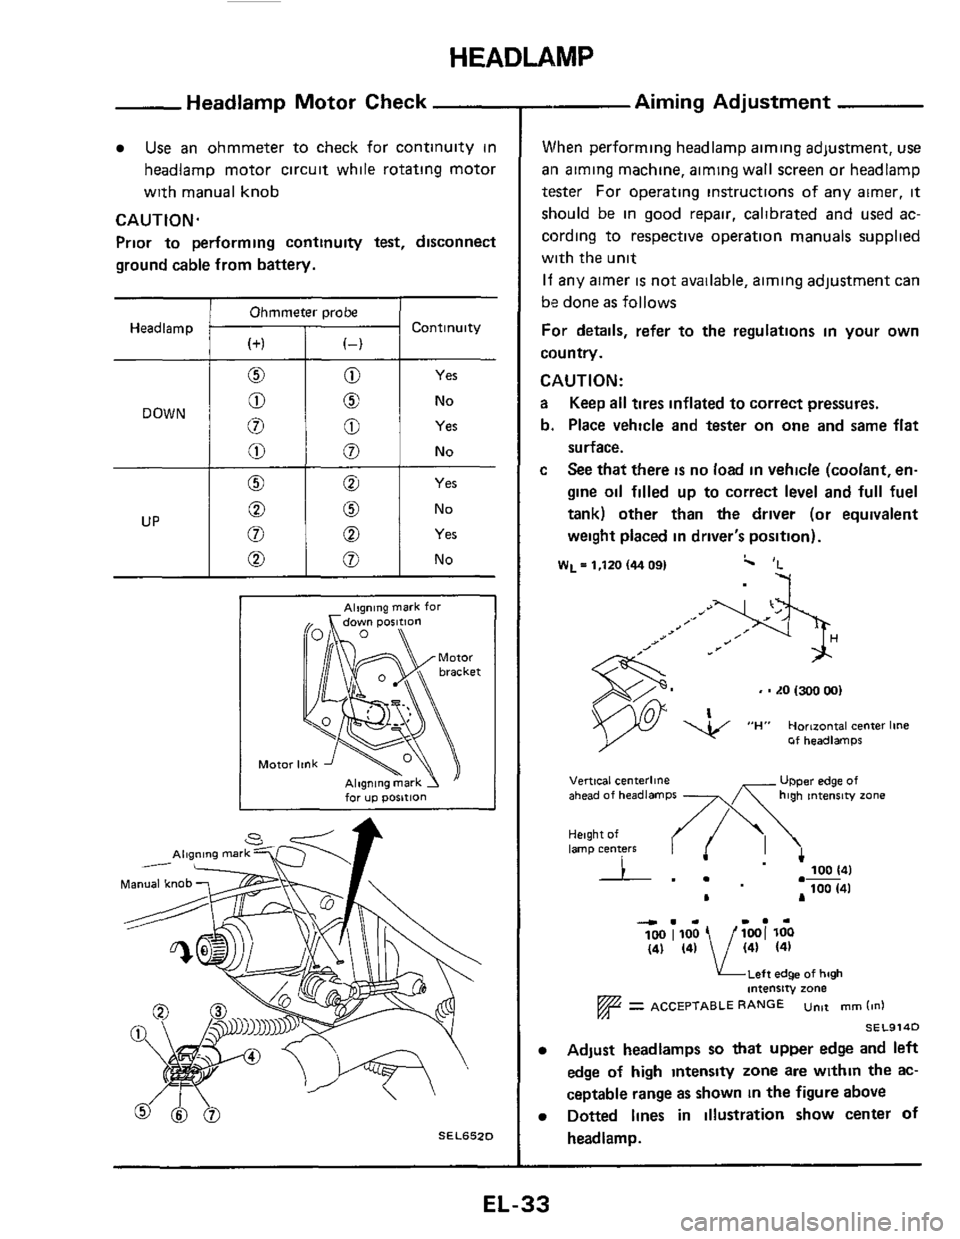 NISSAN 300ZX 1984 Z31 Electrical System Workshop Manual HEADLAMP 
0 
0 
Headlamp Motor Check 
0 No 
8 Yes 
Use an ohmmeter  to check  for  continuity  in 
headlamp  motor circuit while rotating  motor 
with  manual  knob 
CAUTION. 
Prior  to performing  co